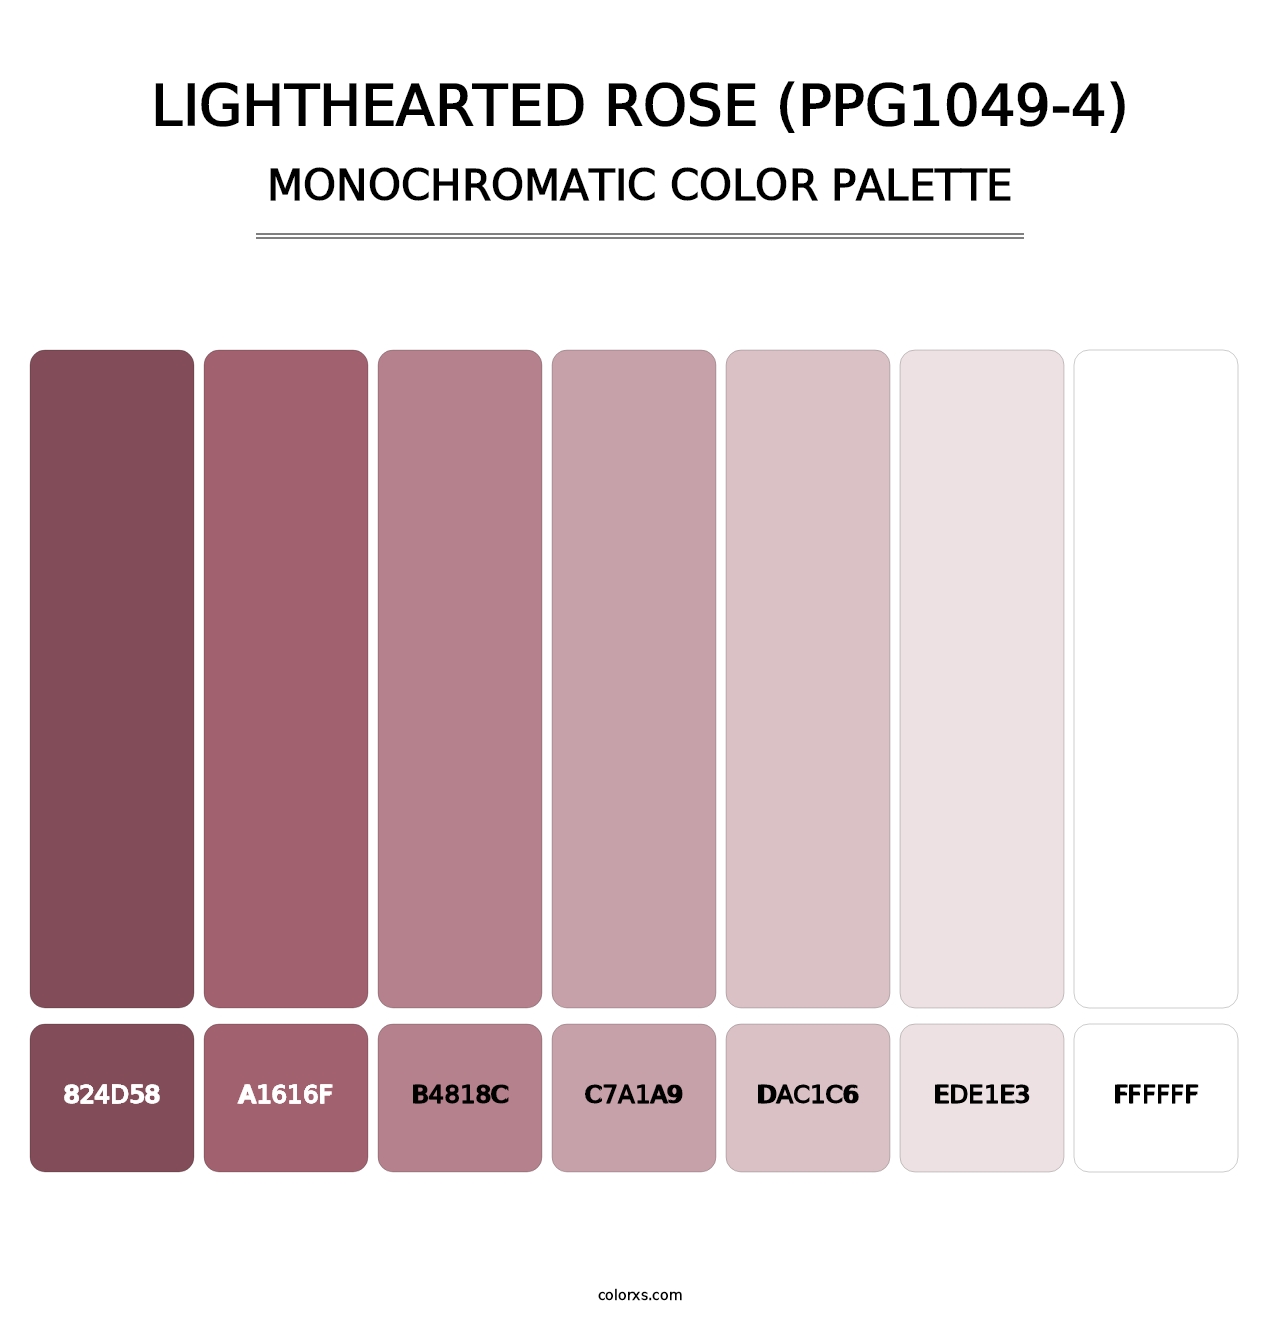 Lighthearted Rose (PPG1049-4) - Monochromatic Color Palette